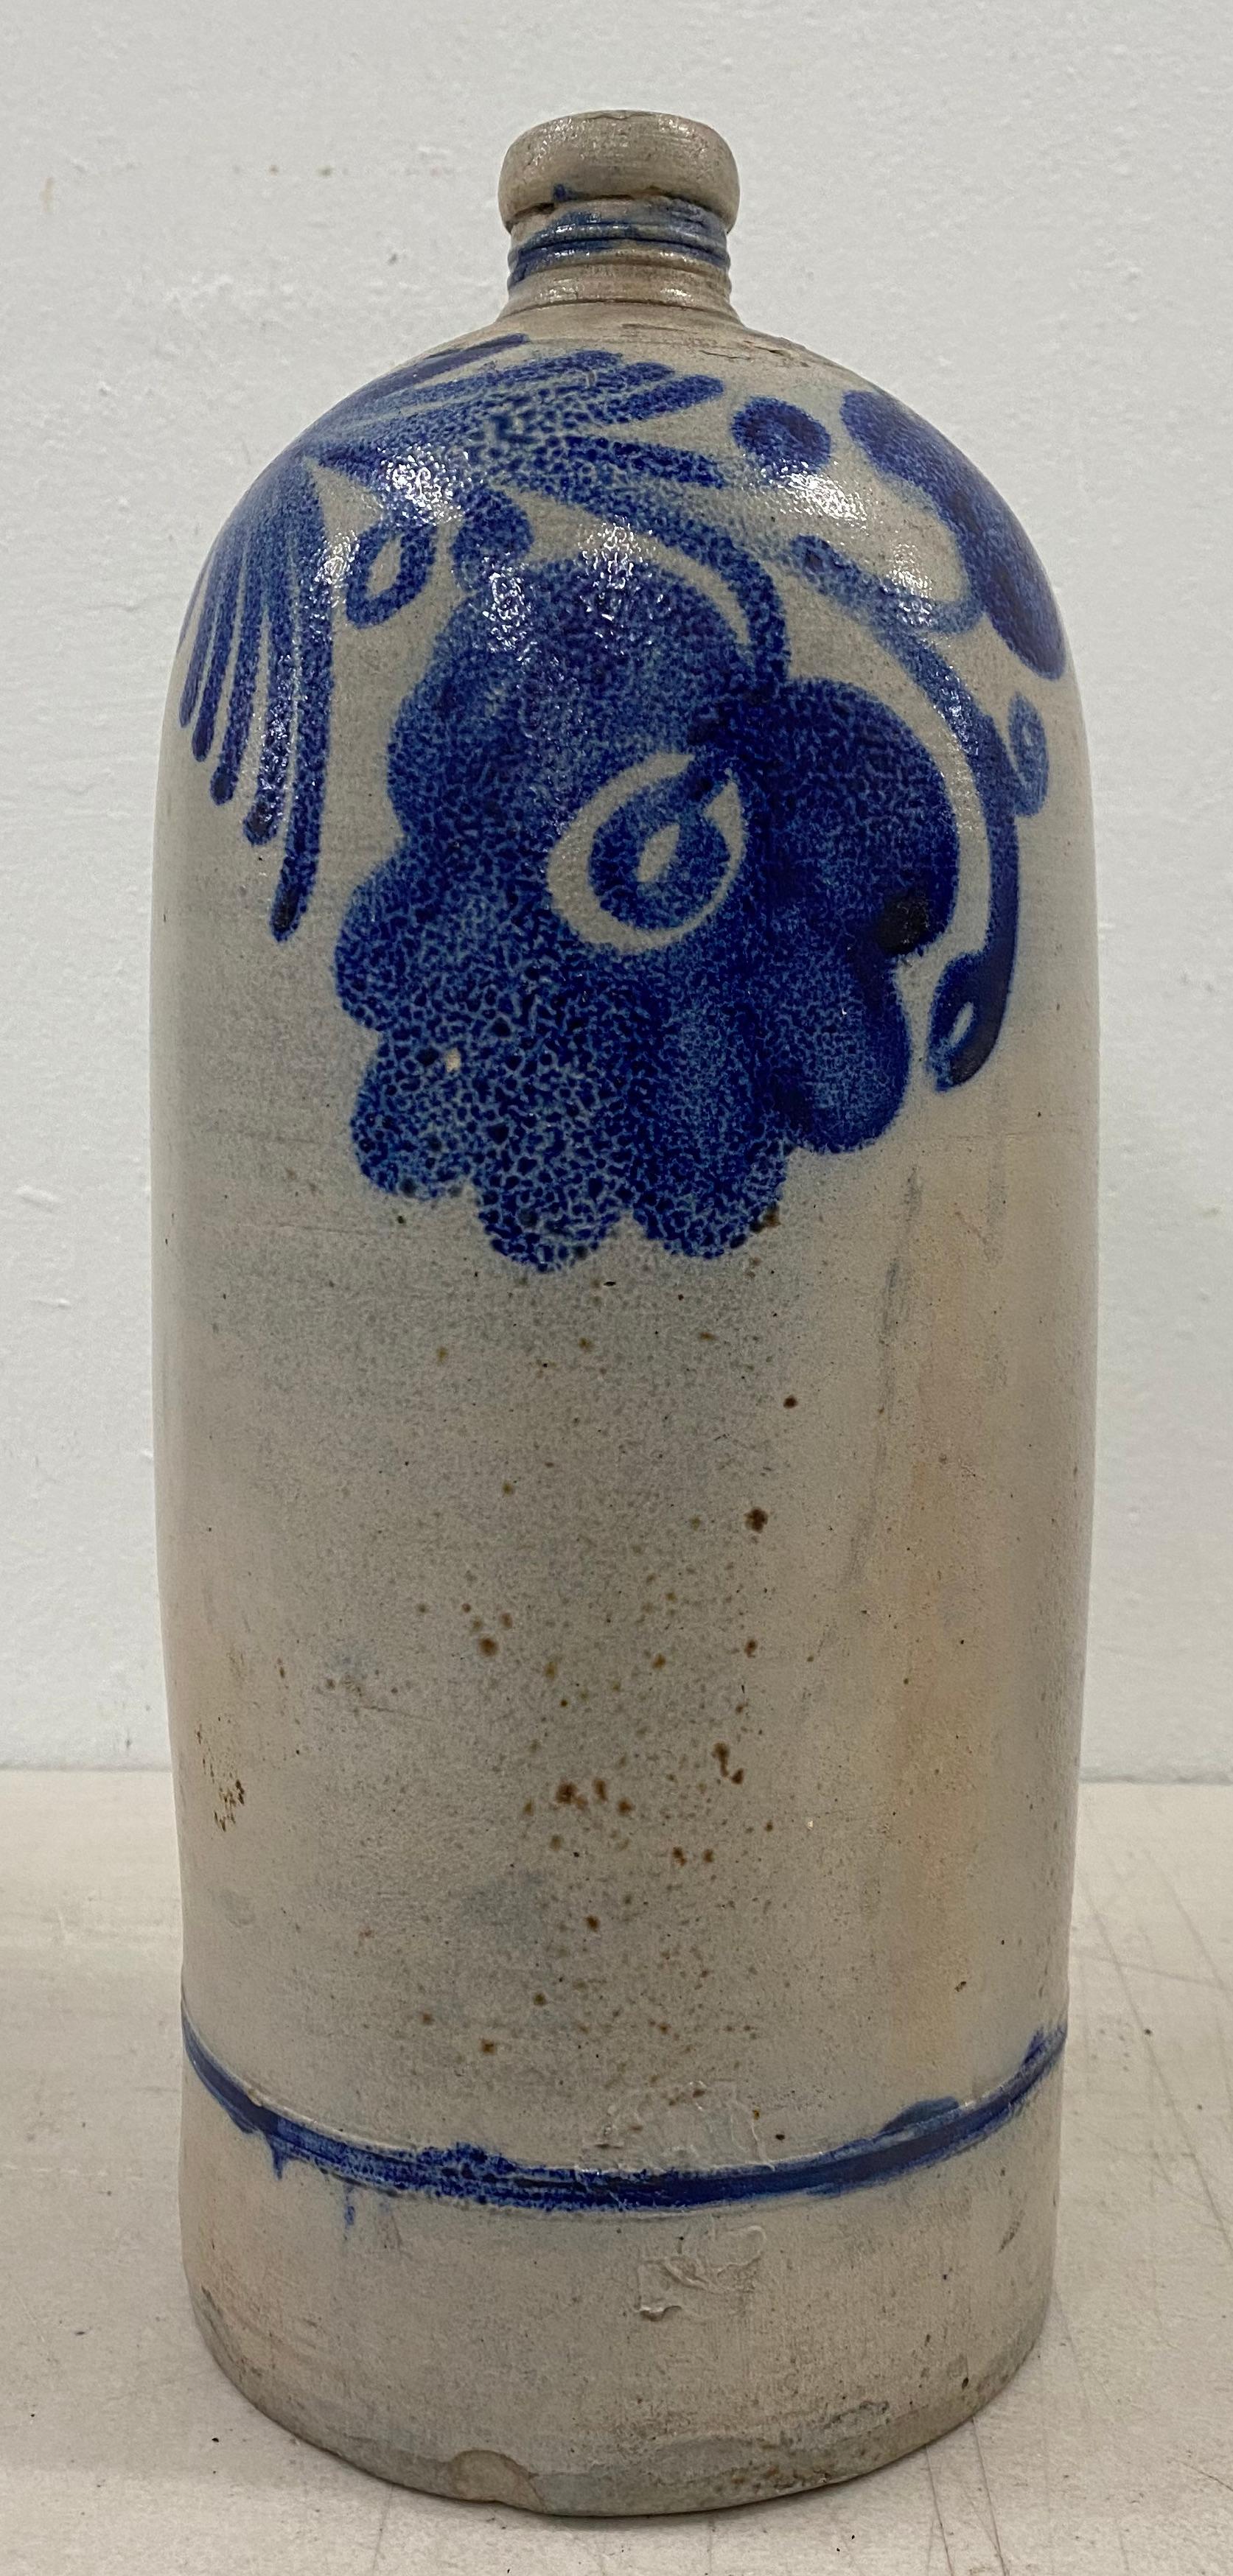 19th century American blue paint decorated stoneware jug w/ handle

The jug shows a minor chip at the base (see pics)

Measures: 6